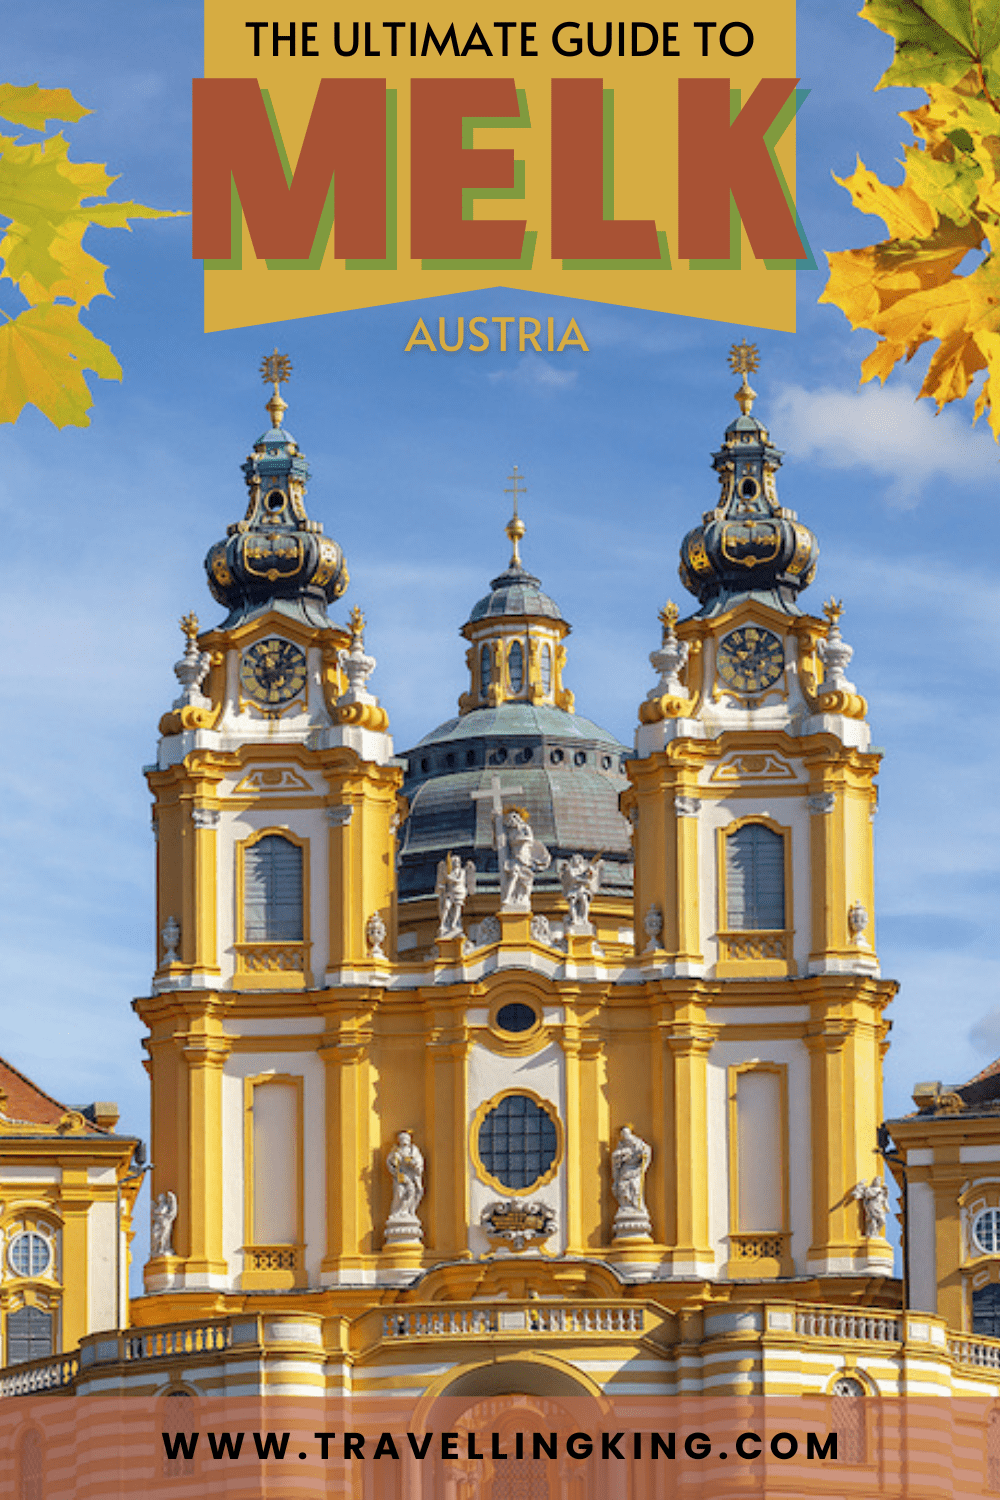 The Ultimate Guide to Melk - Austria